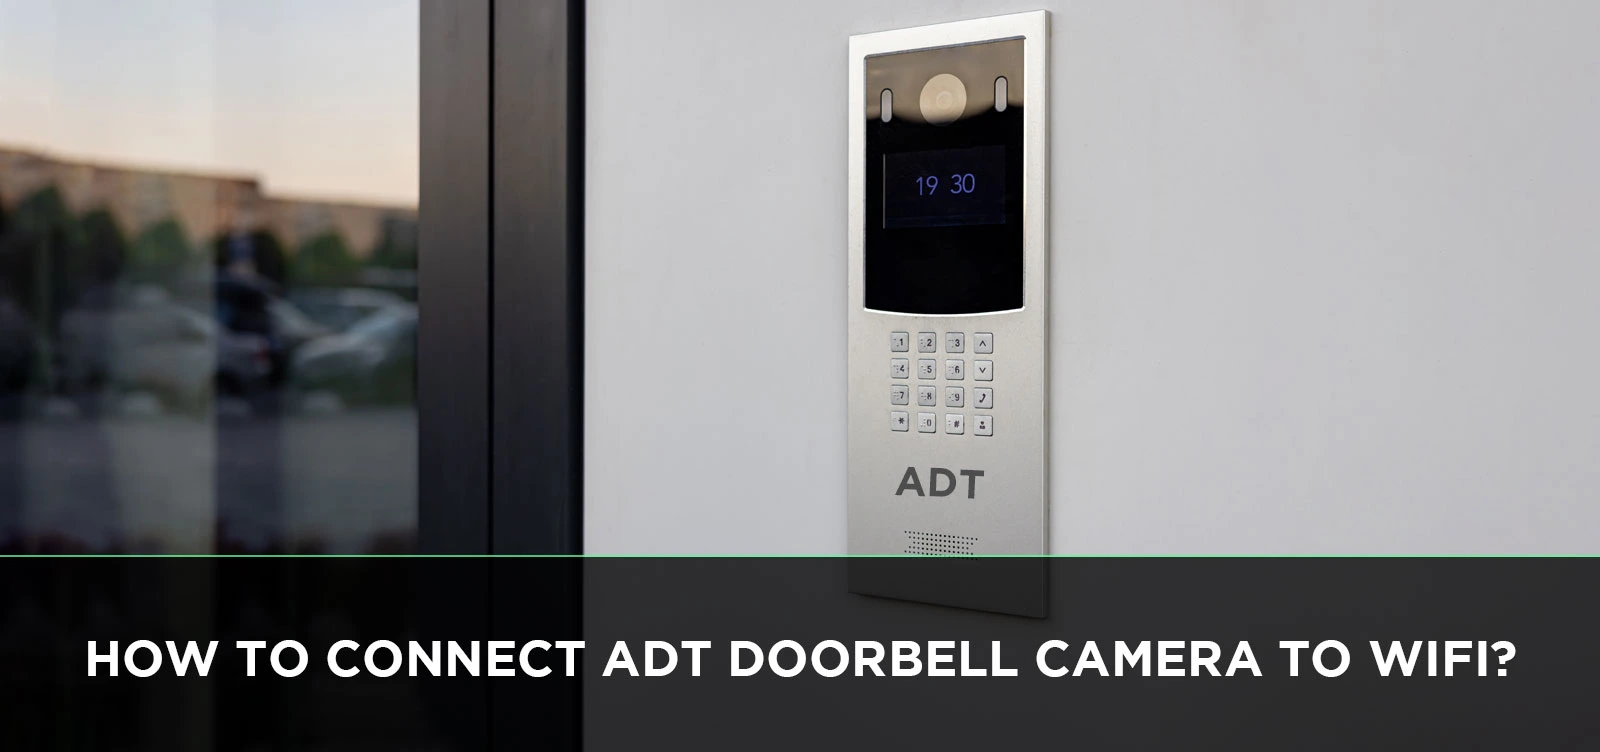 How to Connect ADT Doorbell Camera